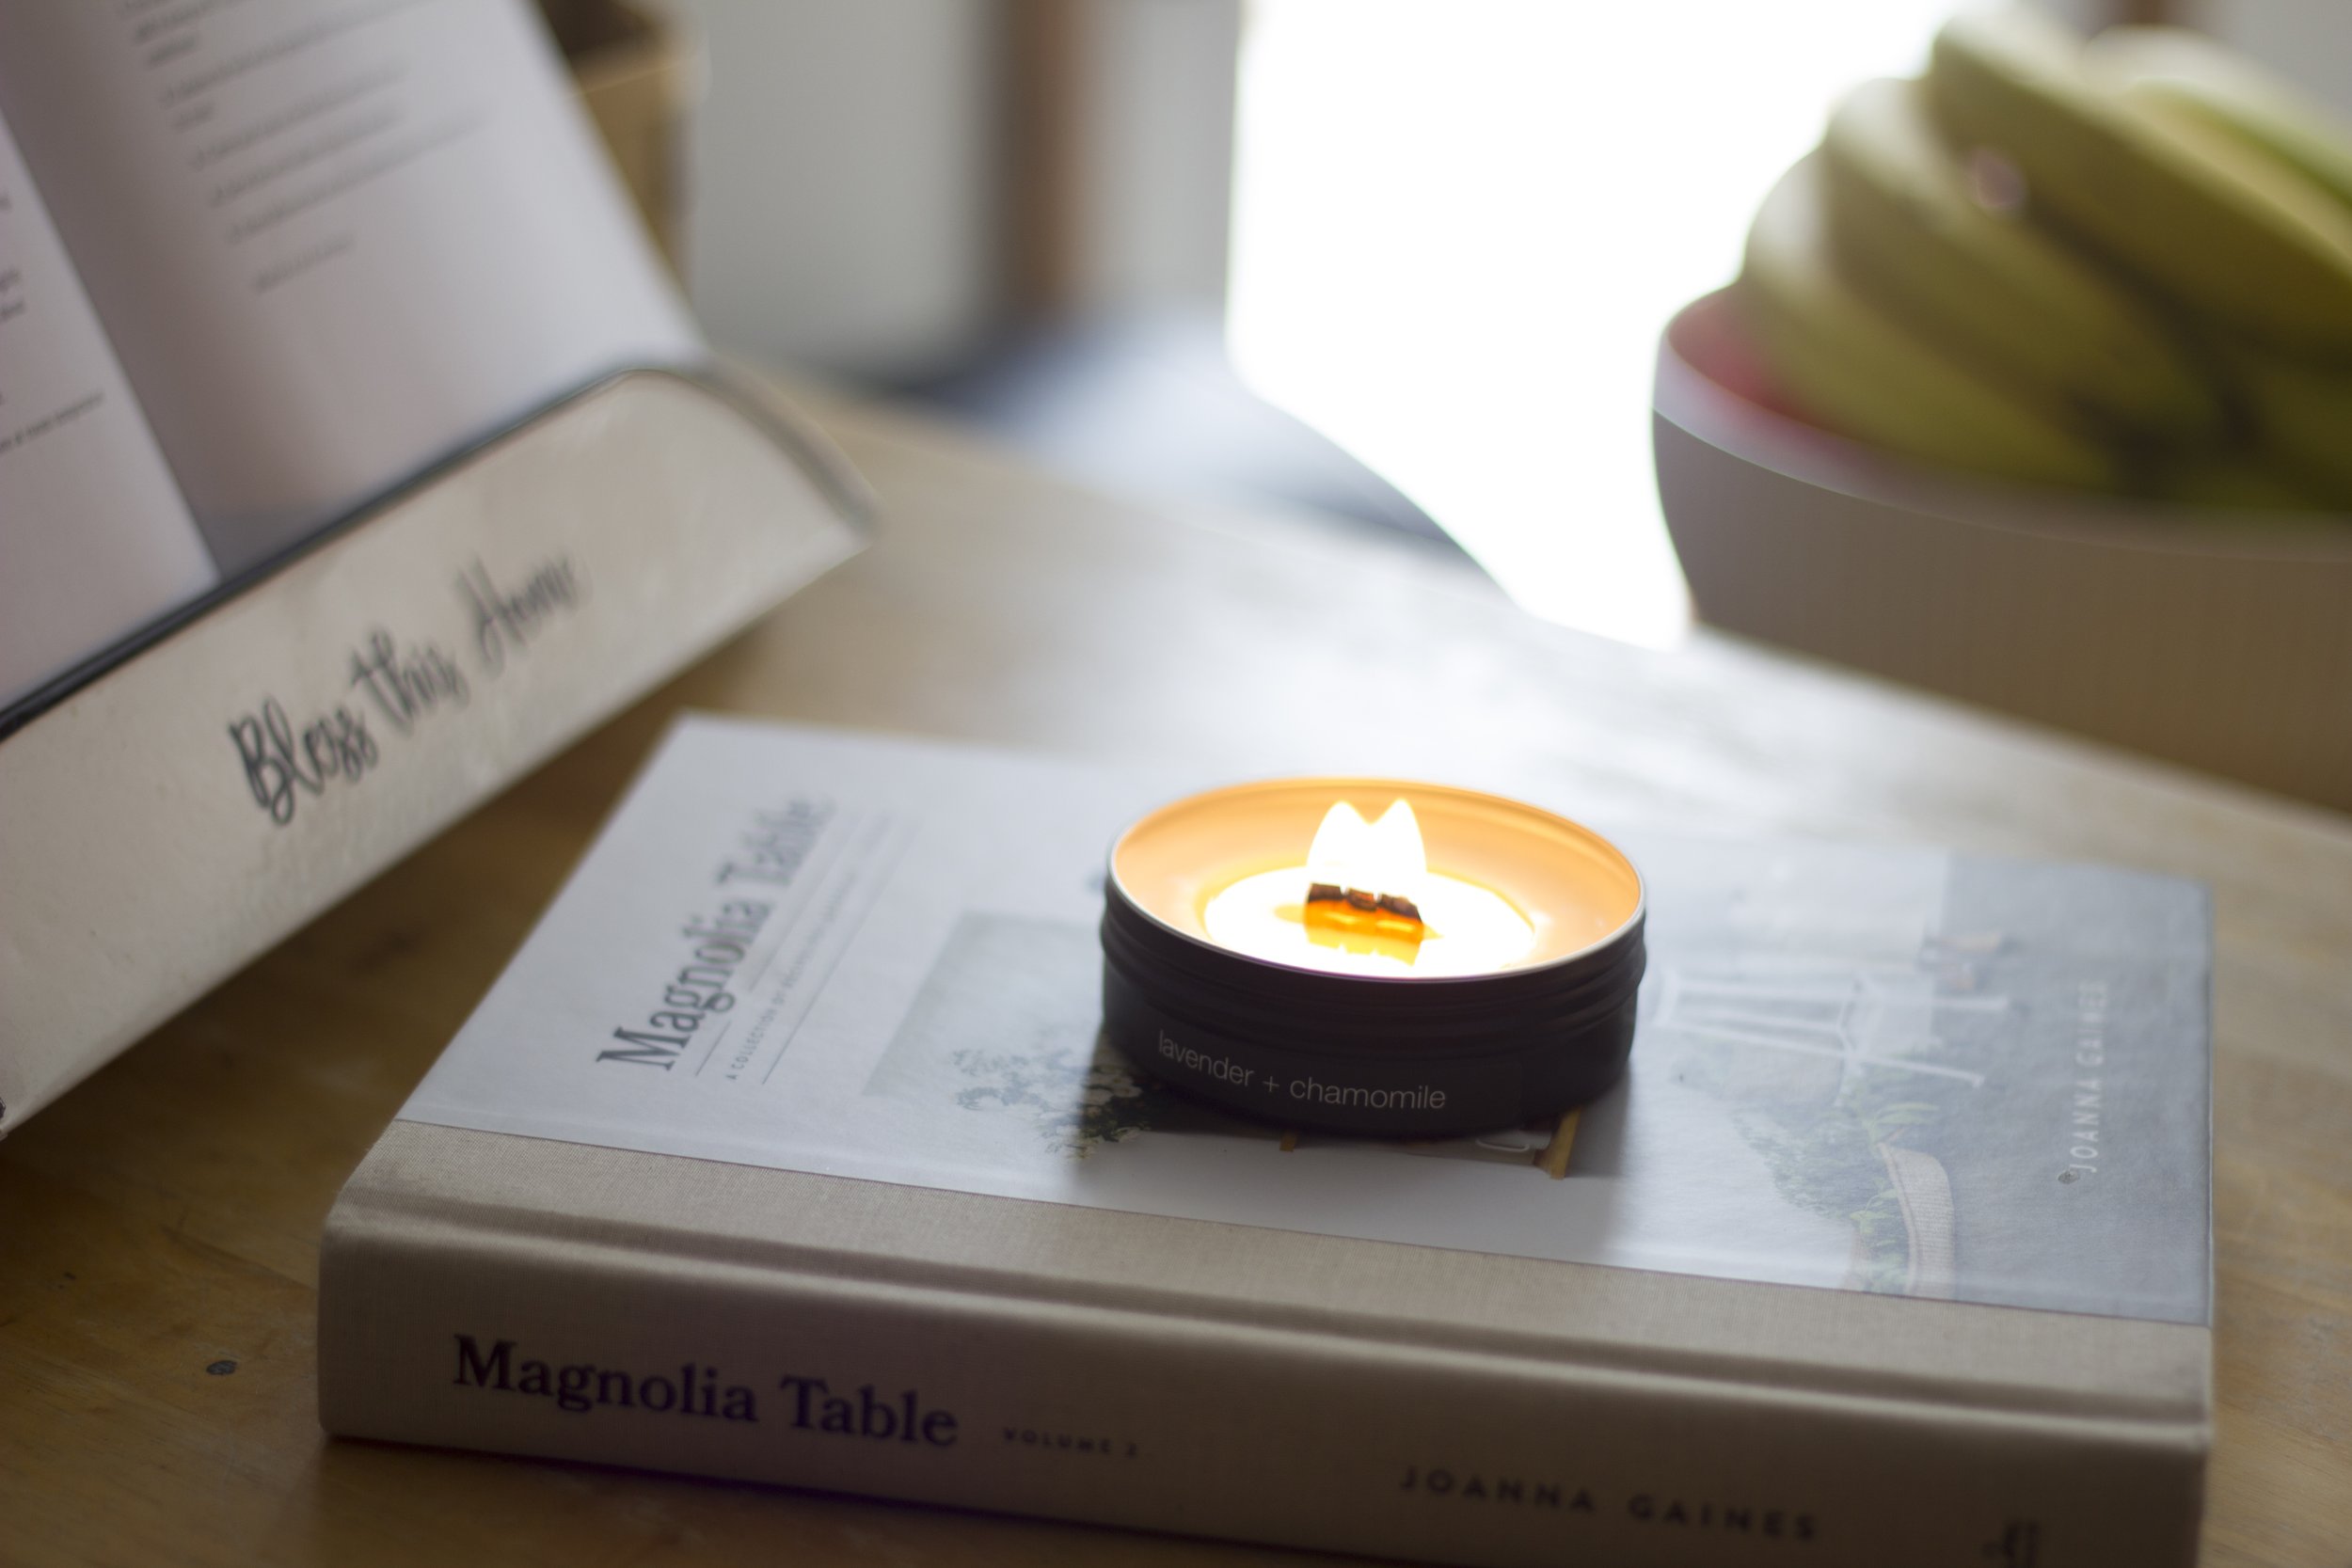 why wooden wicks? — Sable Candle Co.